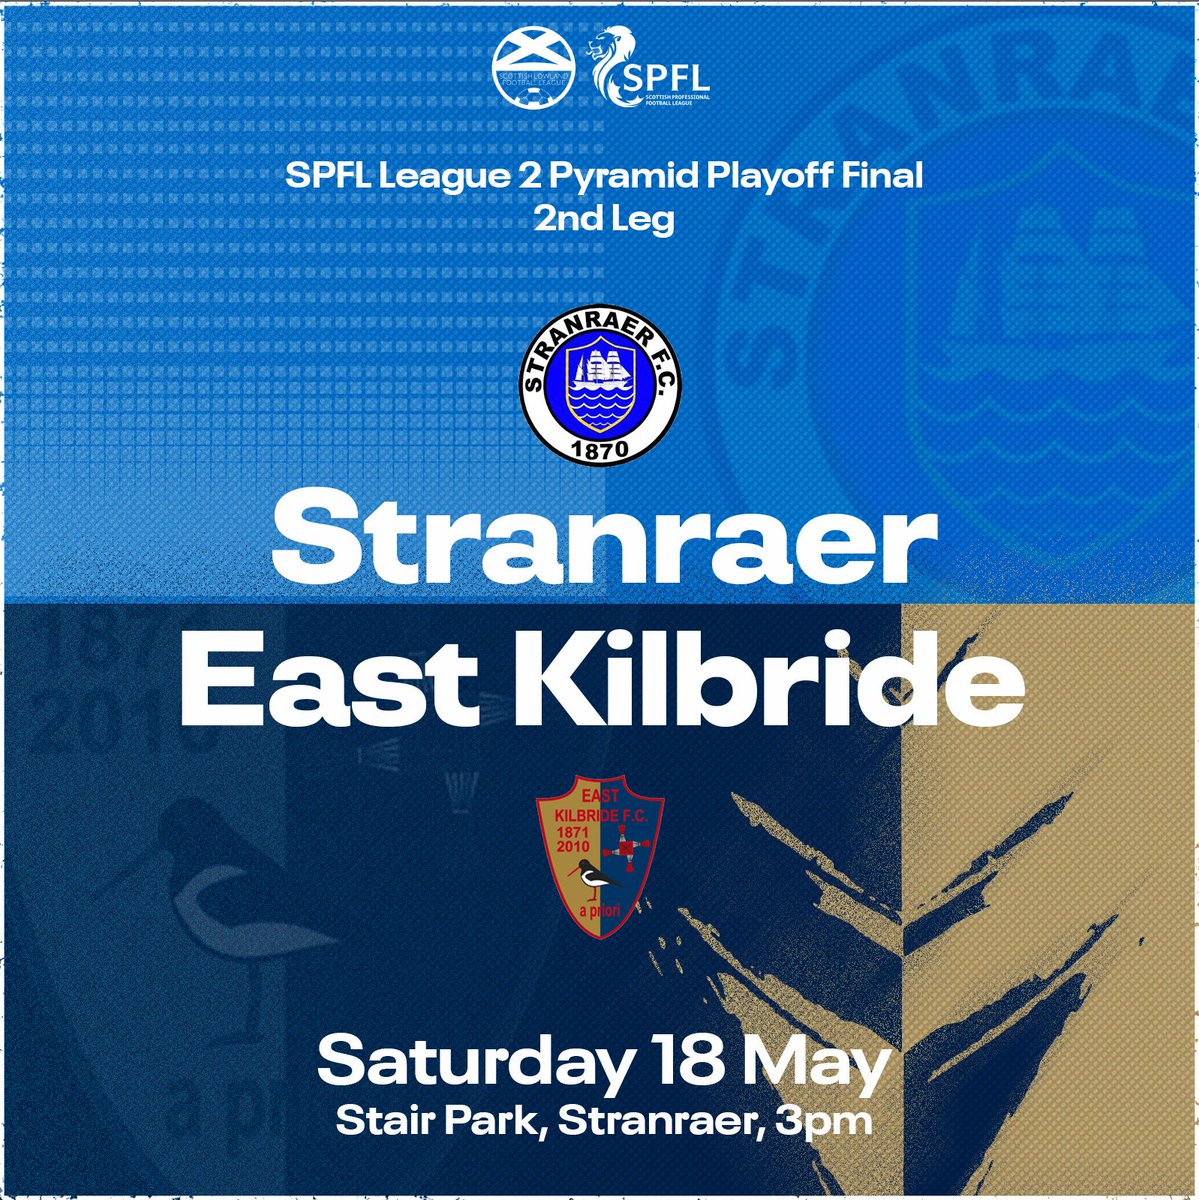 𝑷𝒚𝒓𝒂𝒎𝒊𝒅 𝑷𝒍𝒂𝒚-𝑶𝒇𝒇 𝑺𝒆𝒄𝒐𝒏𝒅 𝑳𝒆𝒈 Following a 2-2 draw at K-Park, it's all to play for as @officialEKFC travel to @StranraerFC on Saturday to determine which side will be playing in League Two, next season ⚽️